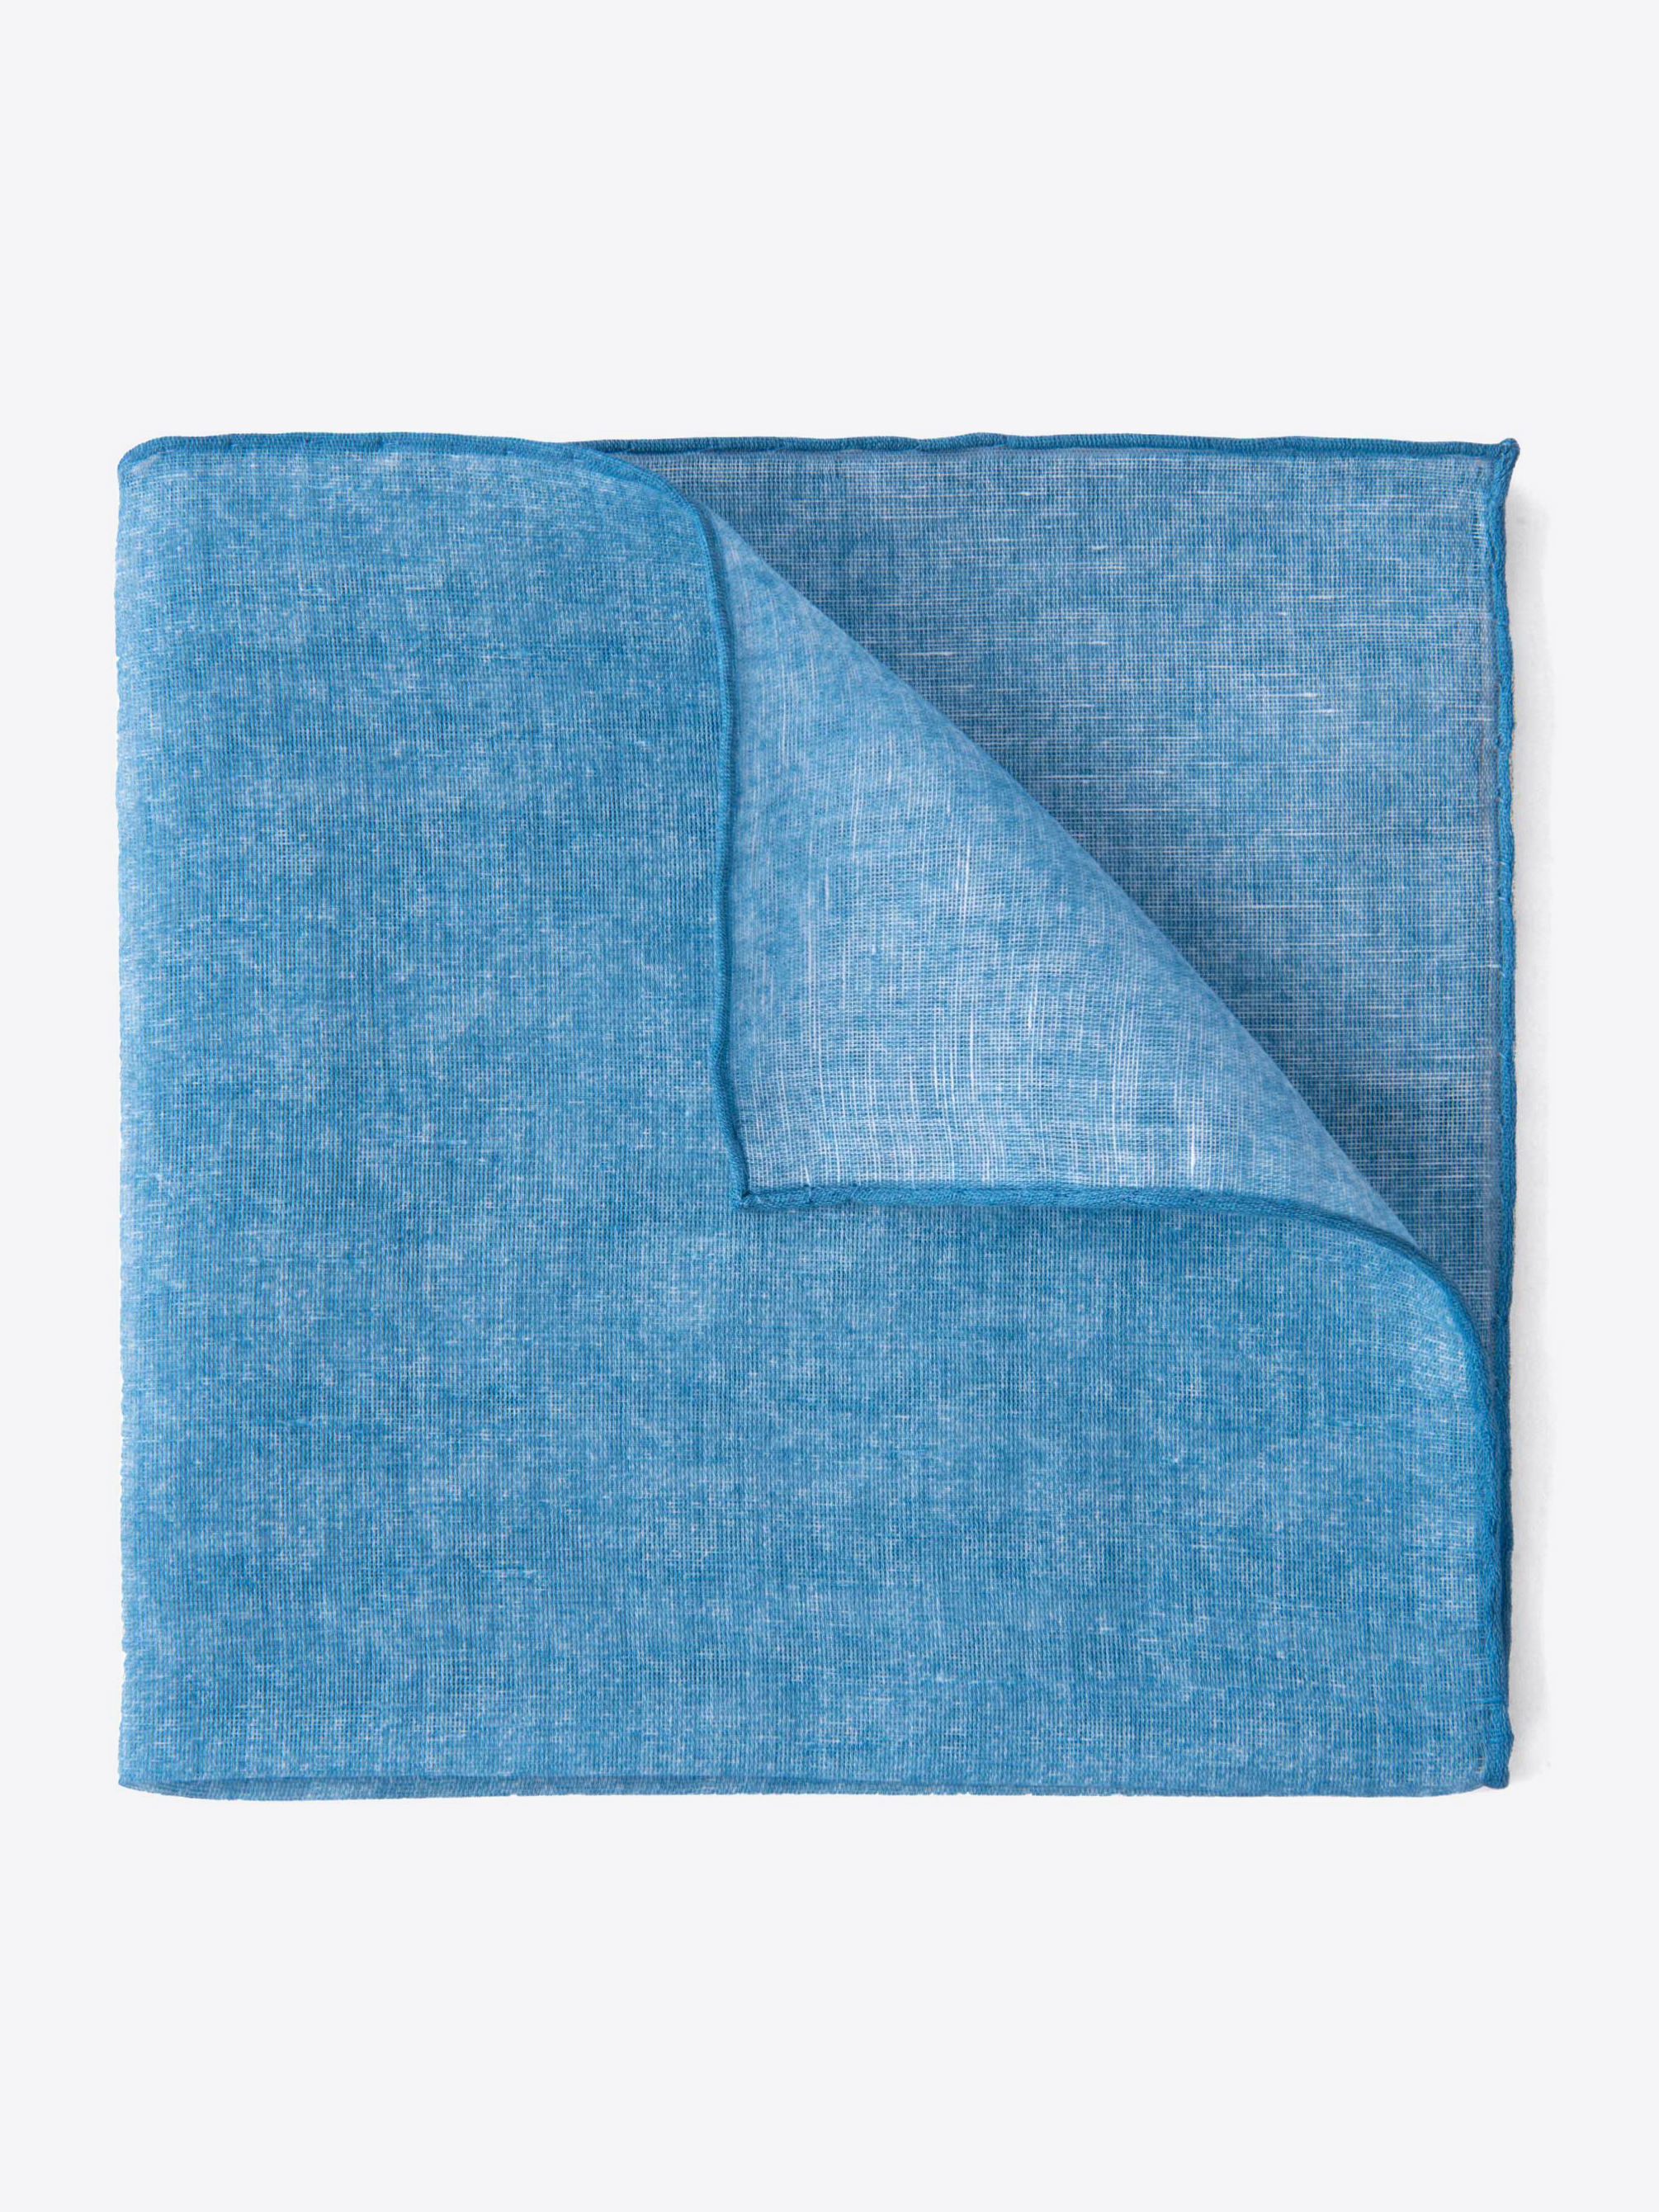 Zoom Image of Turquoise Cotton Linen Pocket Square